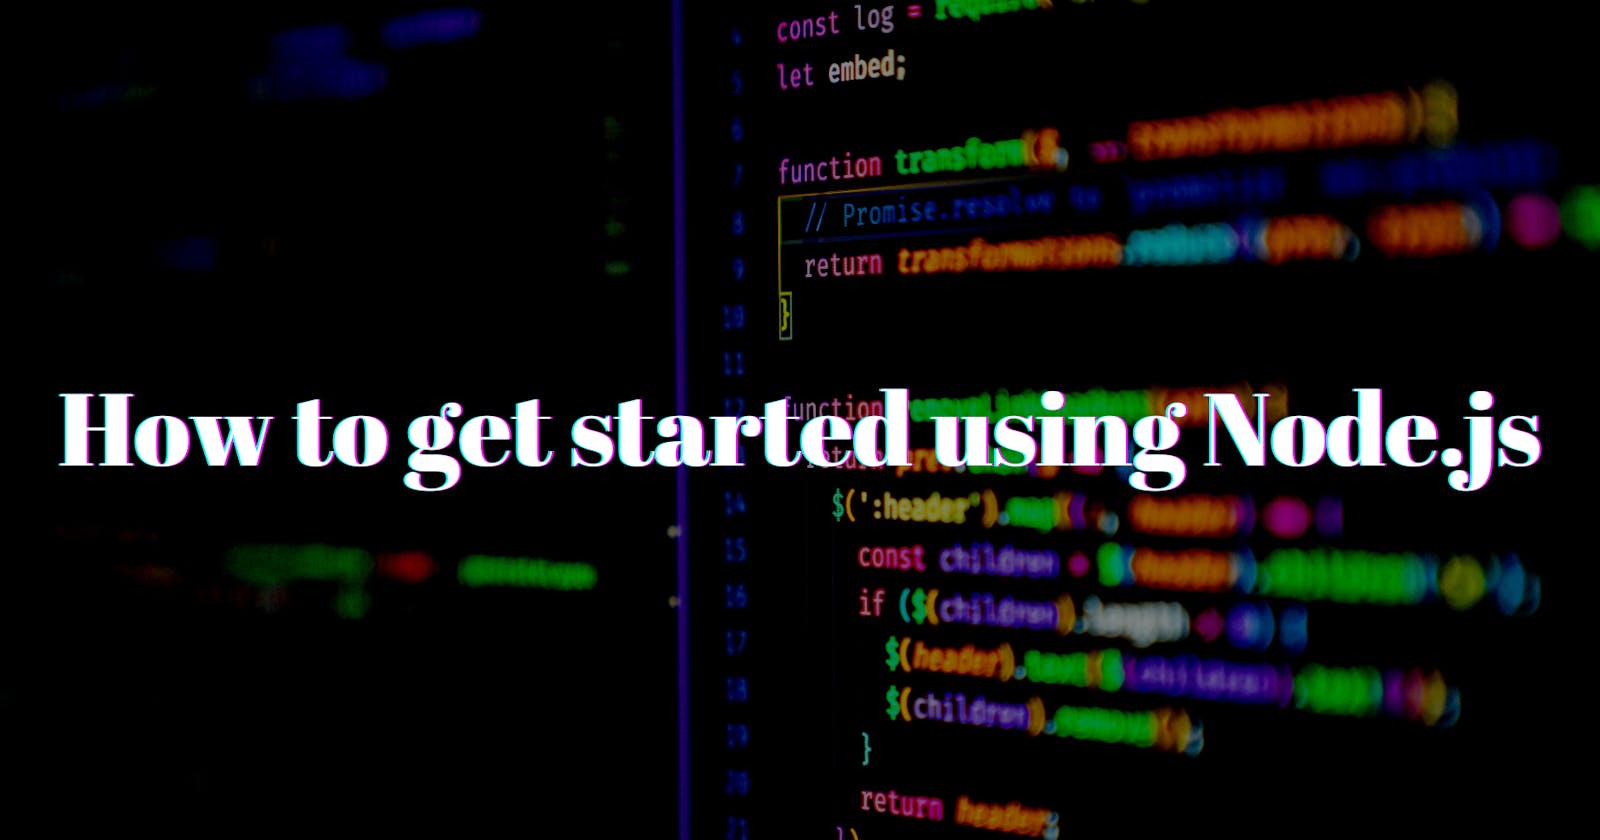 How to get started using Node.js